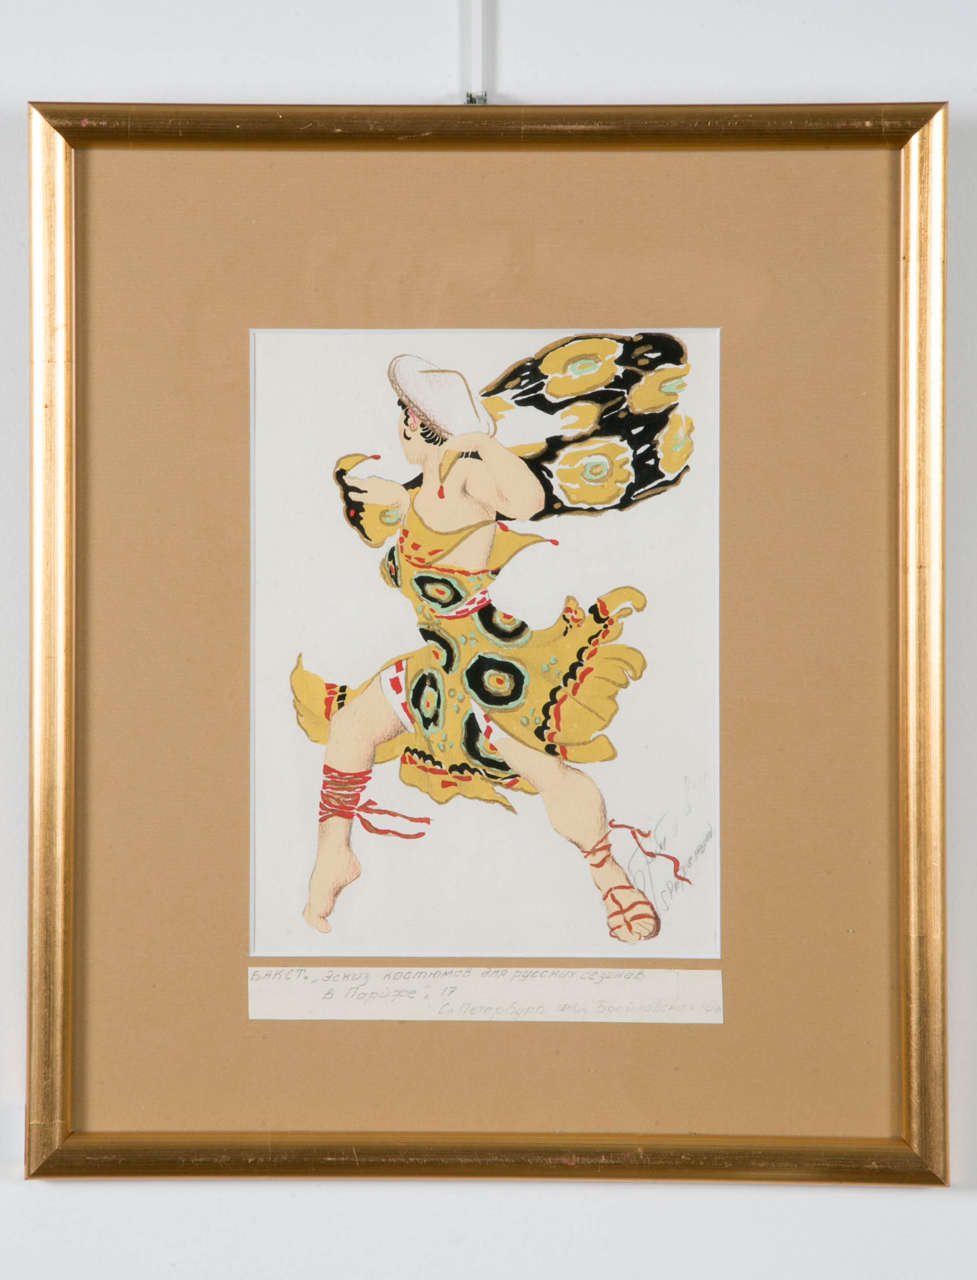 Costume sketch for the dancer Nijinsky in the role of Narcissus (Russian Ballet). Silkscreen enhanced with gold paint. Bakst mention in Cyrillic. Cyrillic headband affixed below the image.

Image dimension: 23cm x17cm
Frame dimension: 39x33cm